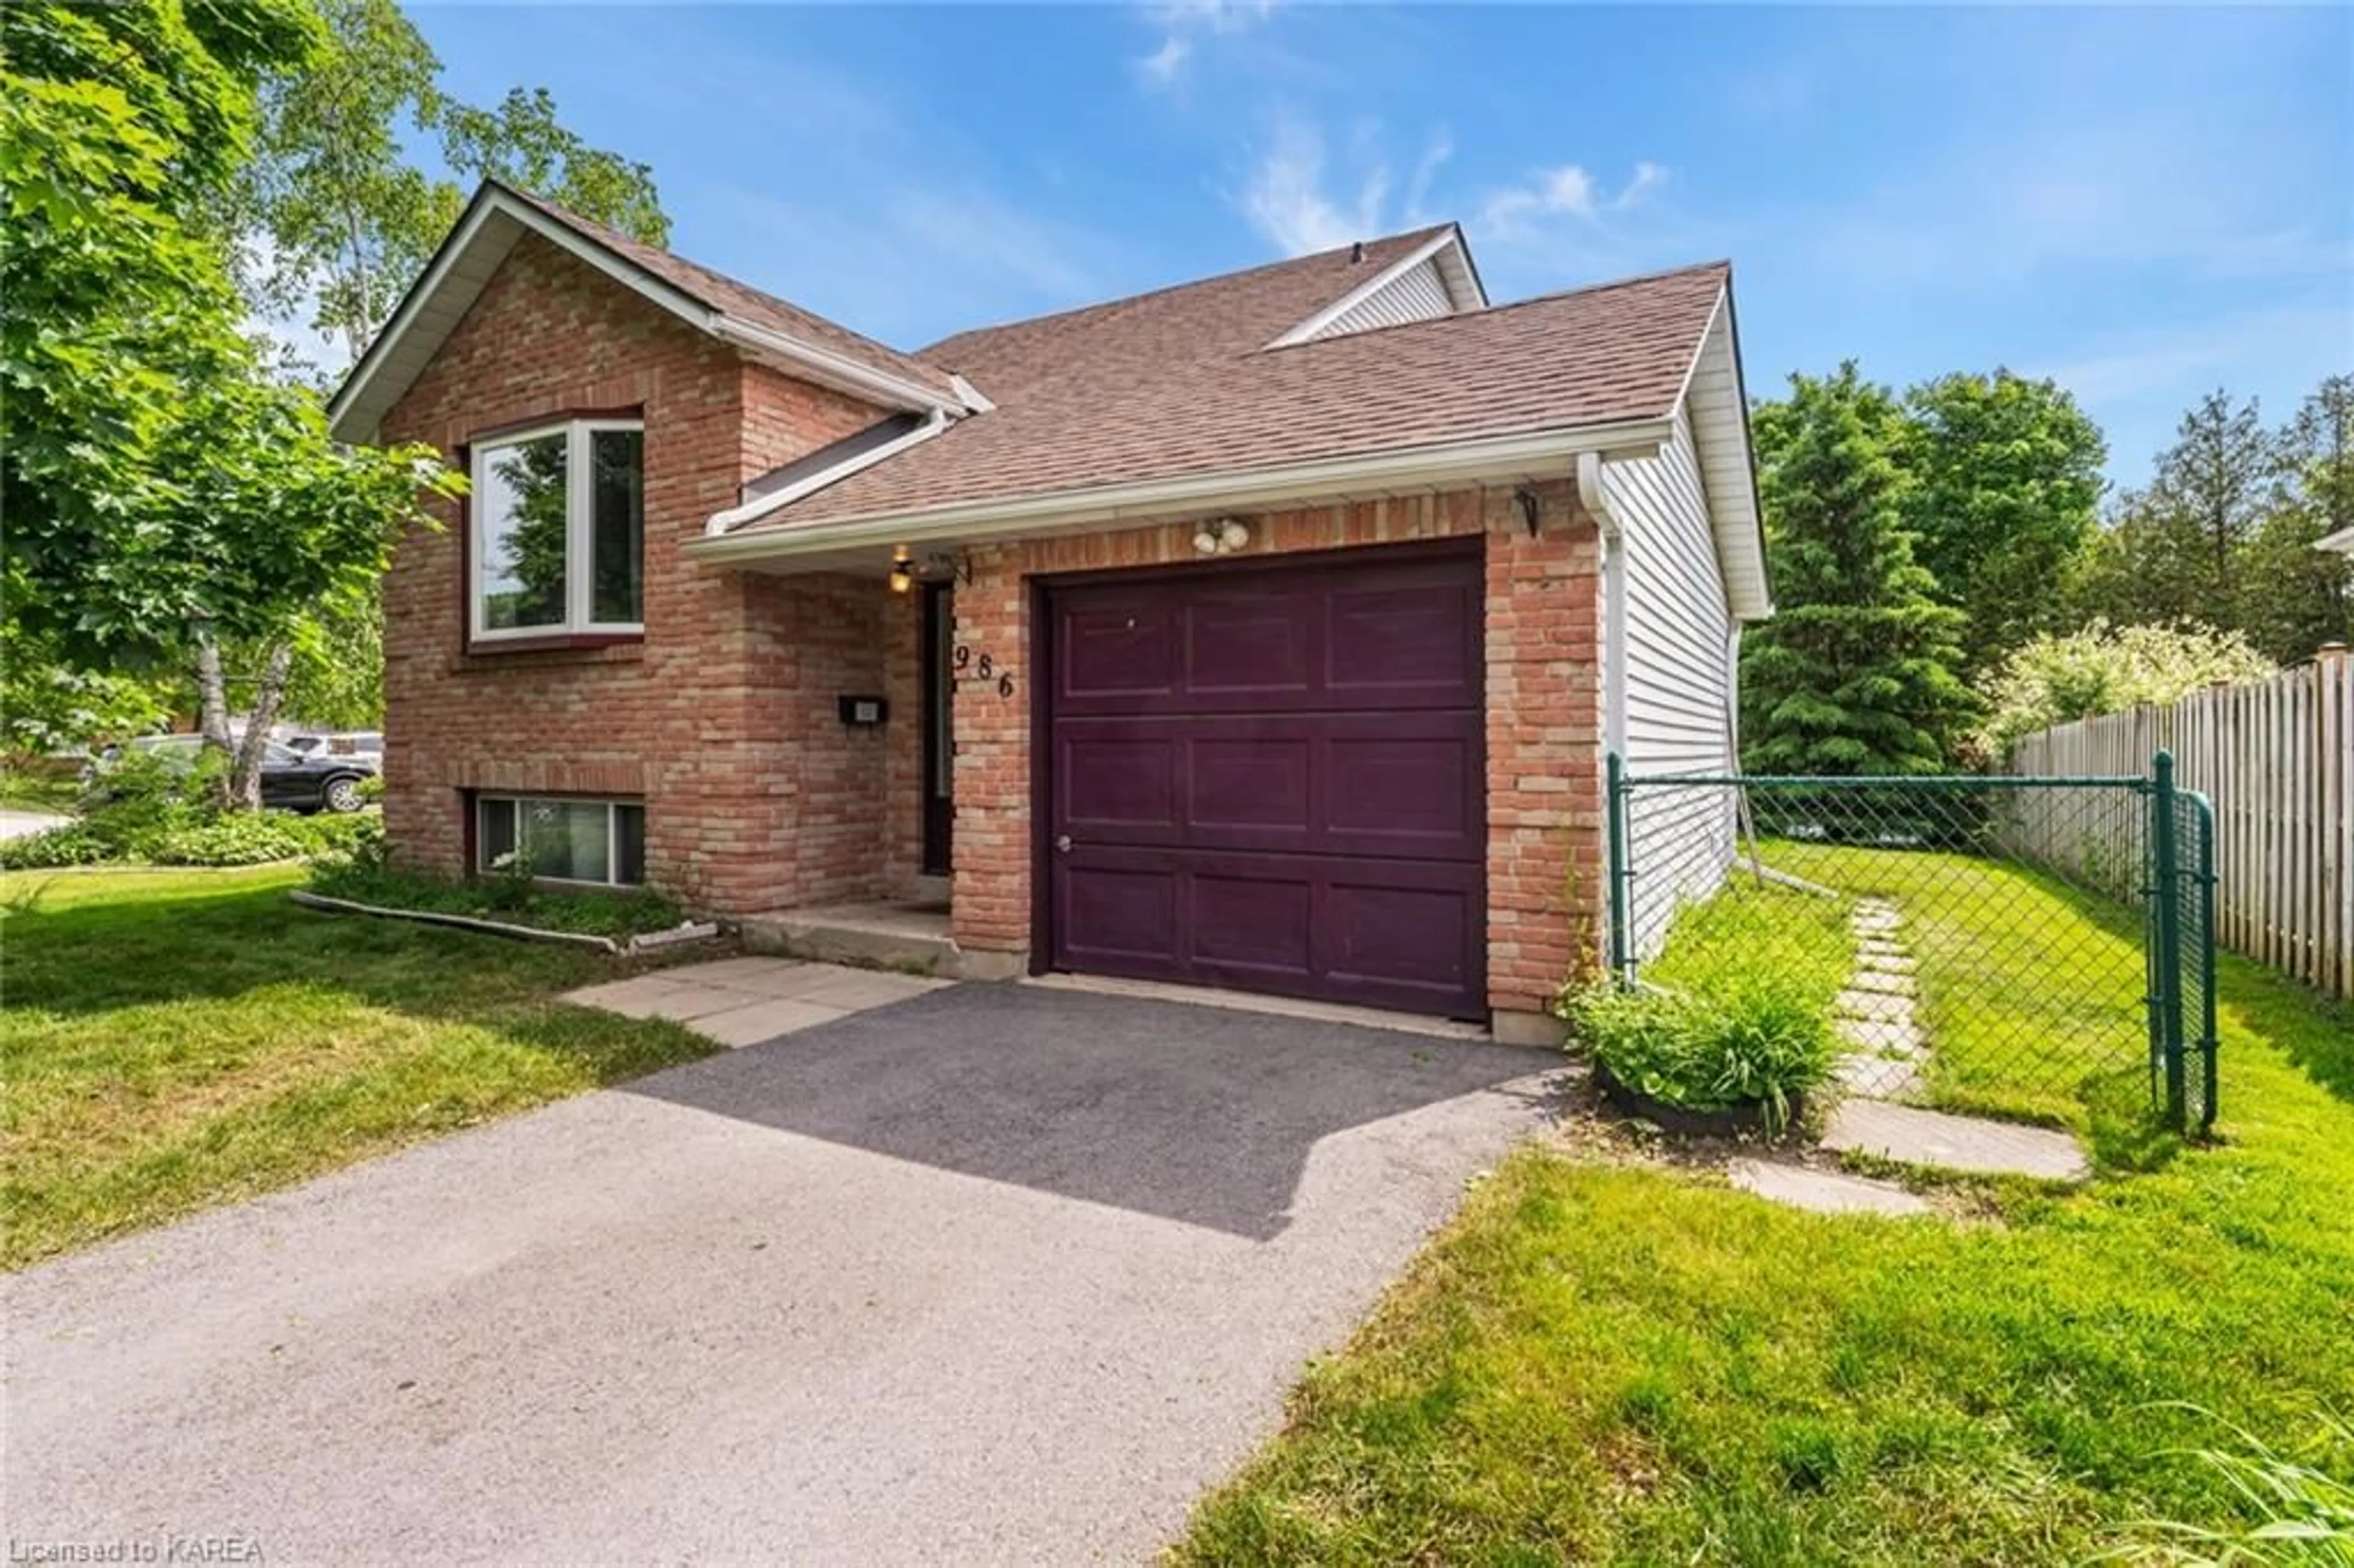 Home with brick exterior material for 986 Pinewood Pl, Kingston Ontario K7P 1L5